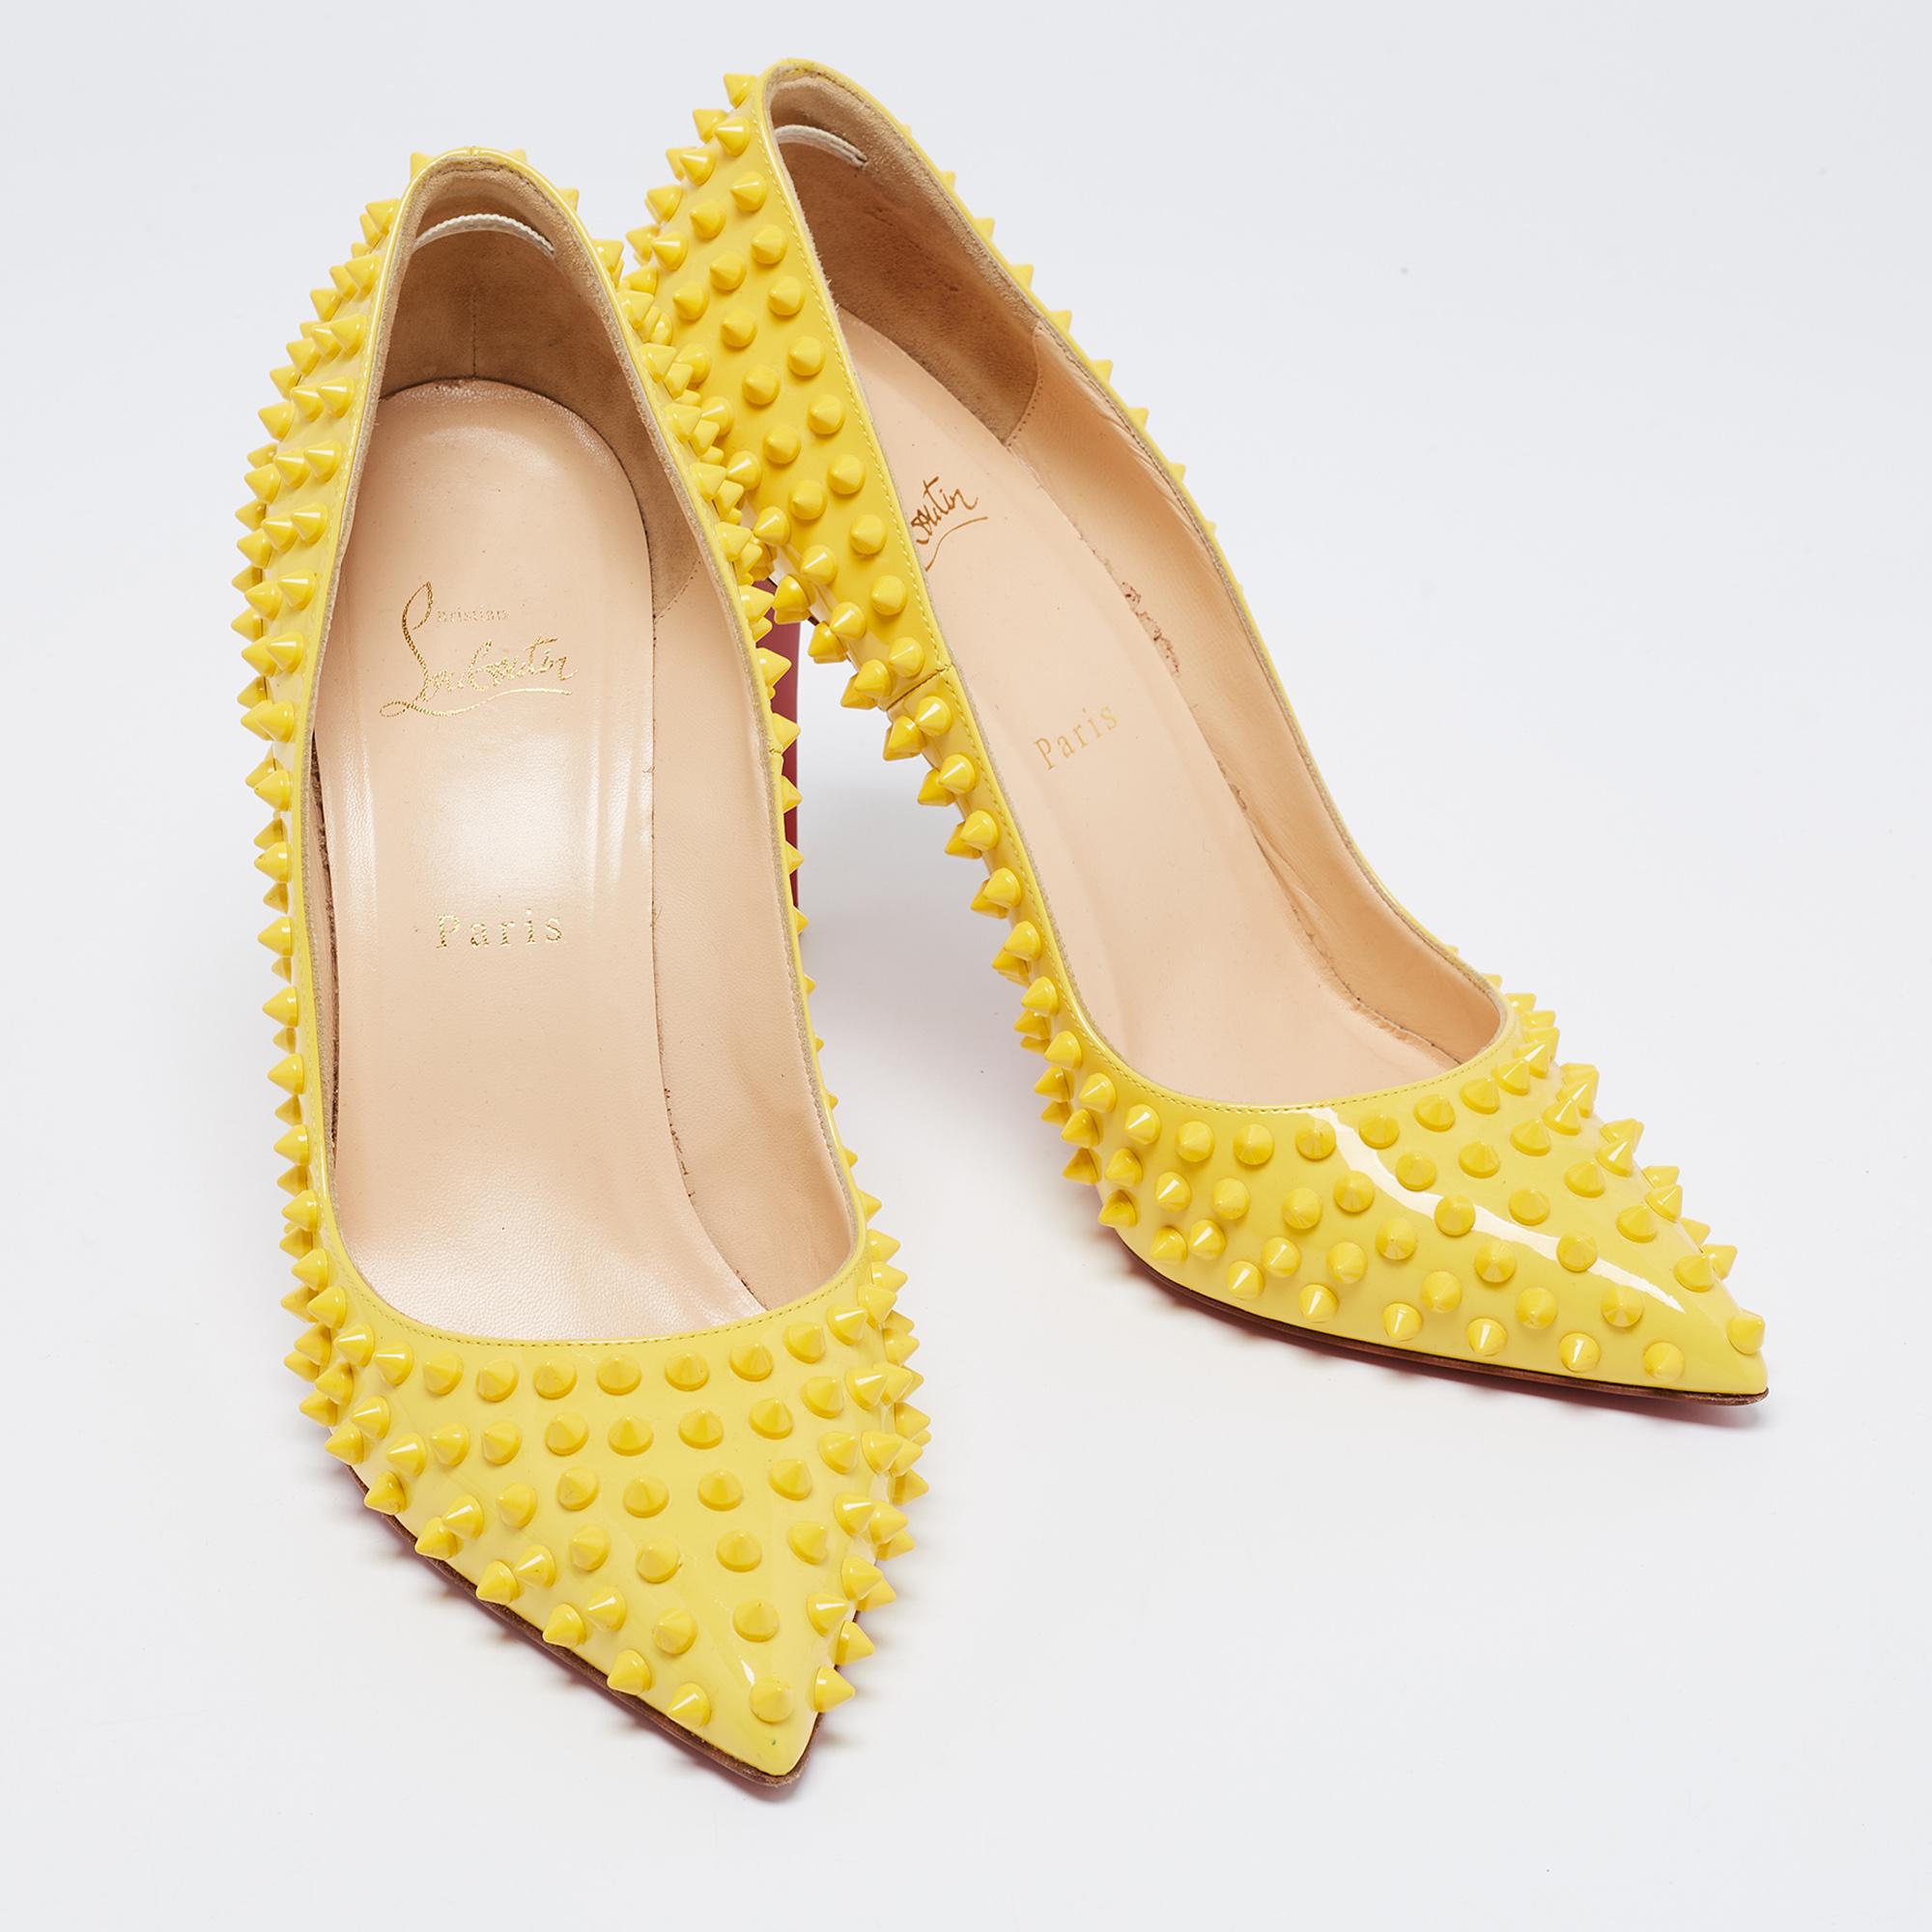 Dazzle everyone with these Louboutins by owning them today. Crafted from patent leather, these summery, bright yellow pumps carry a sleek shape with studded spikes all over, pointed toes, and 11 cm heels. Complete with the signature red soles, this